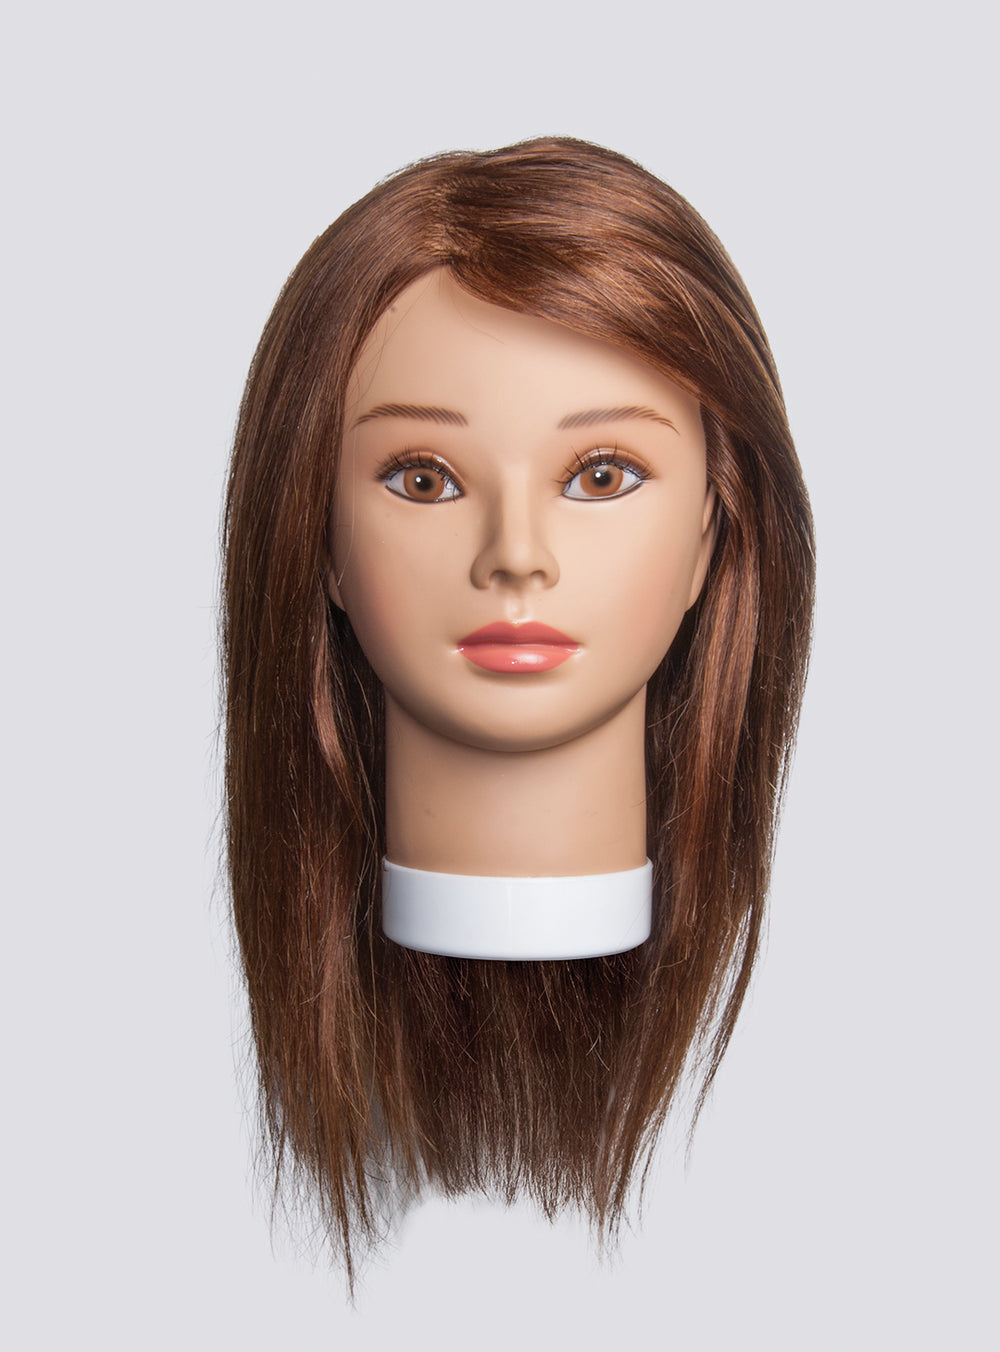 HairArt Cosmetology Mannequin Head (Emma LB) with Human Hair - My Salon  Express Barber and Salon Supply